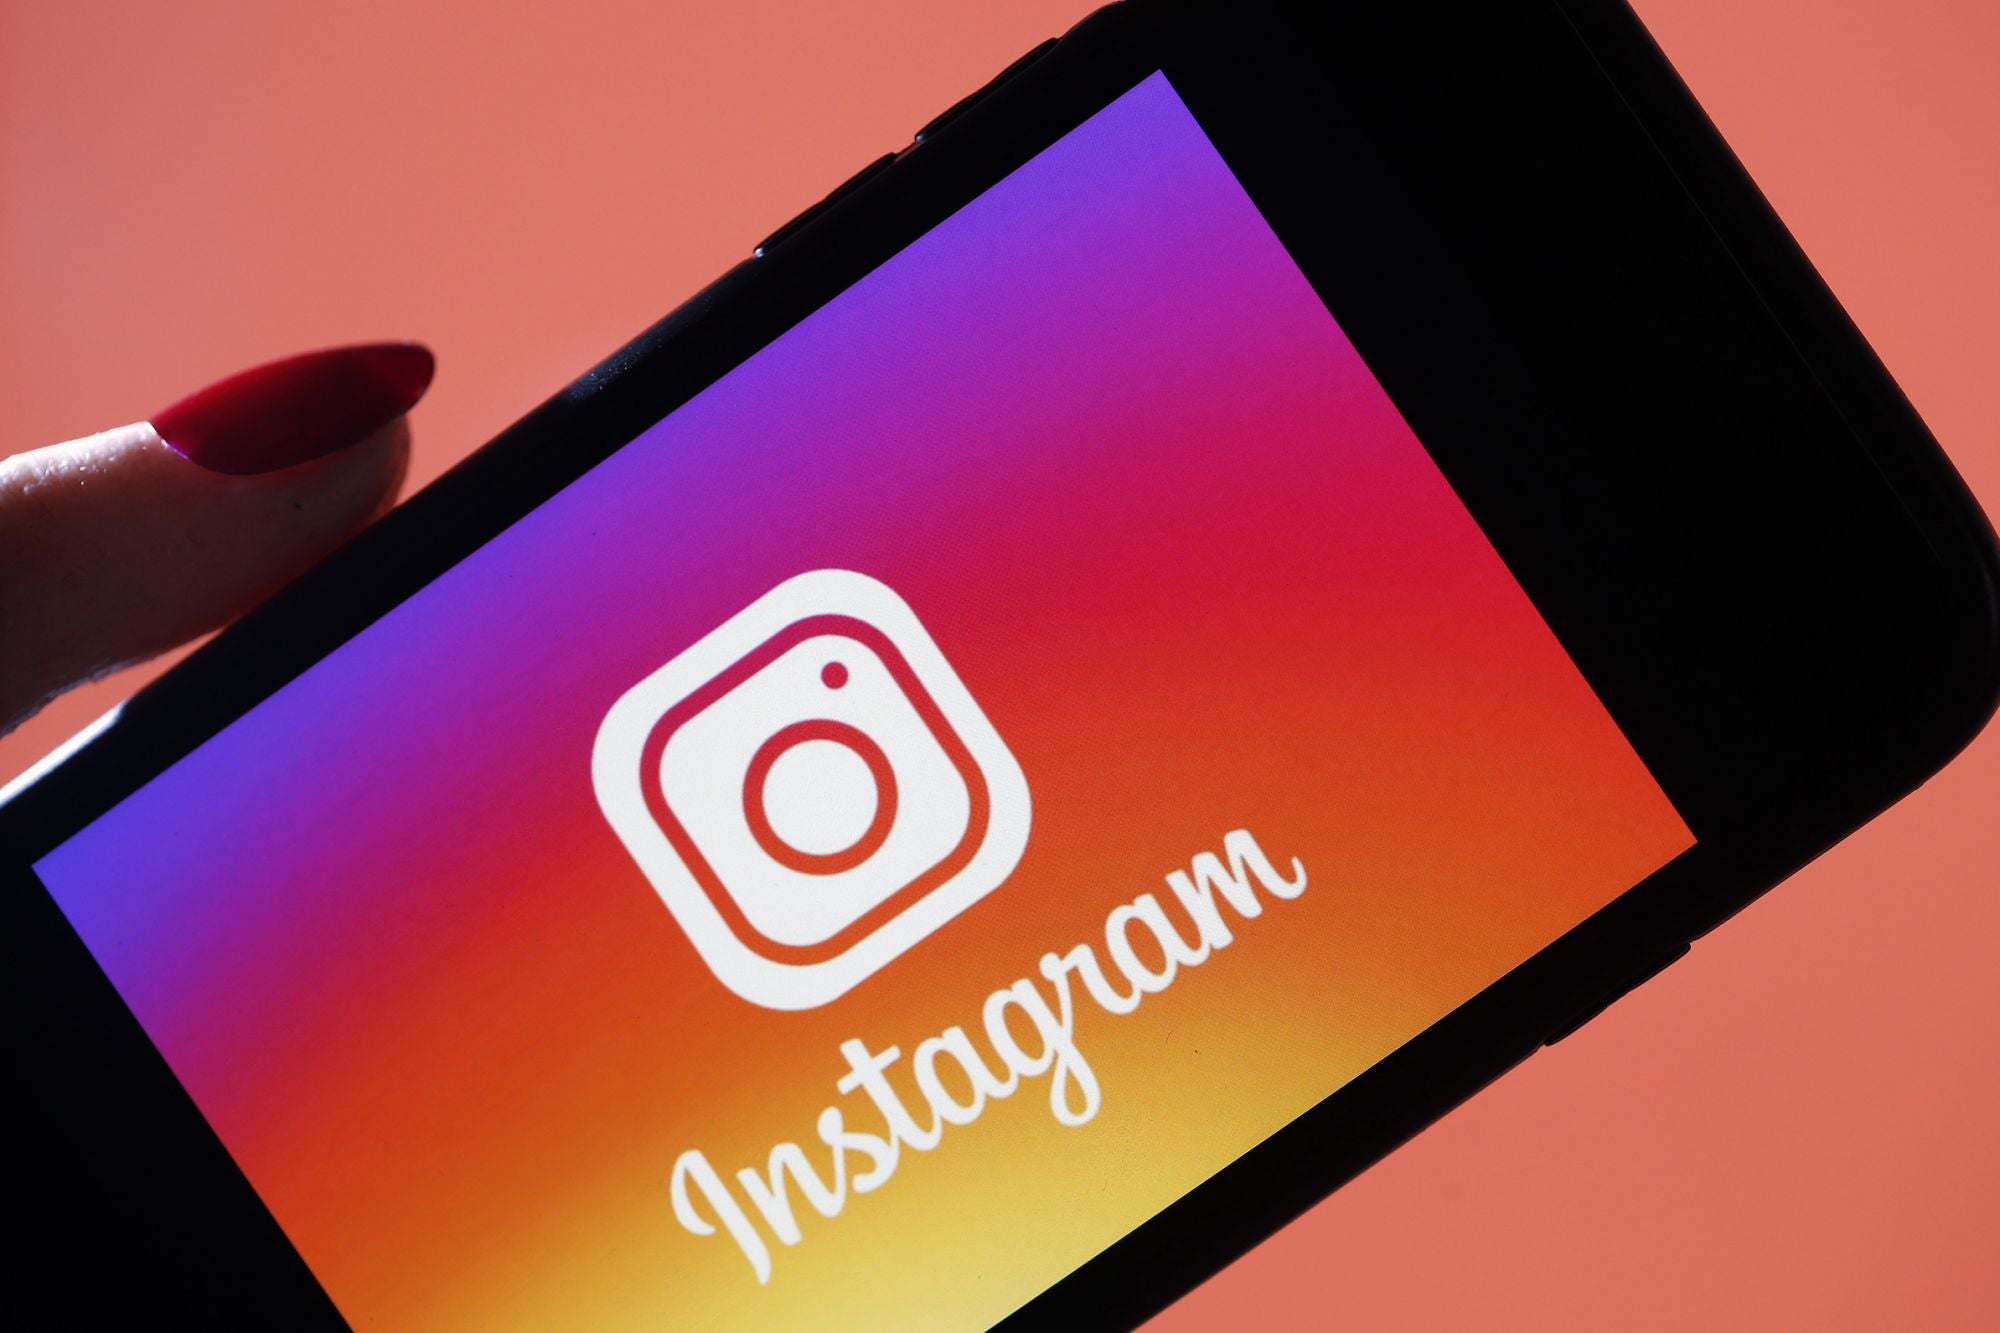 Why are people craving to view private Instagram accounts?